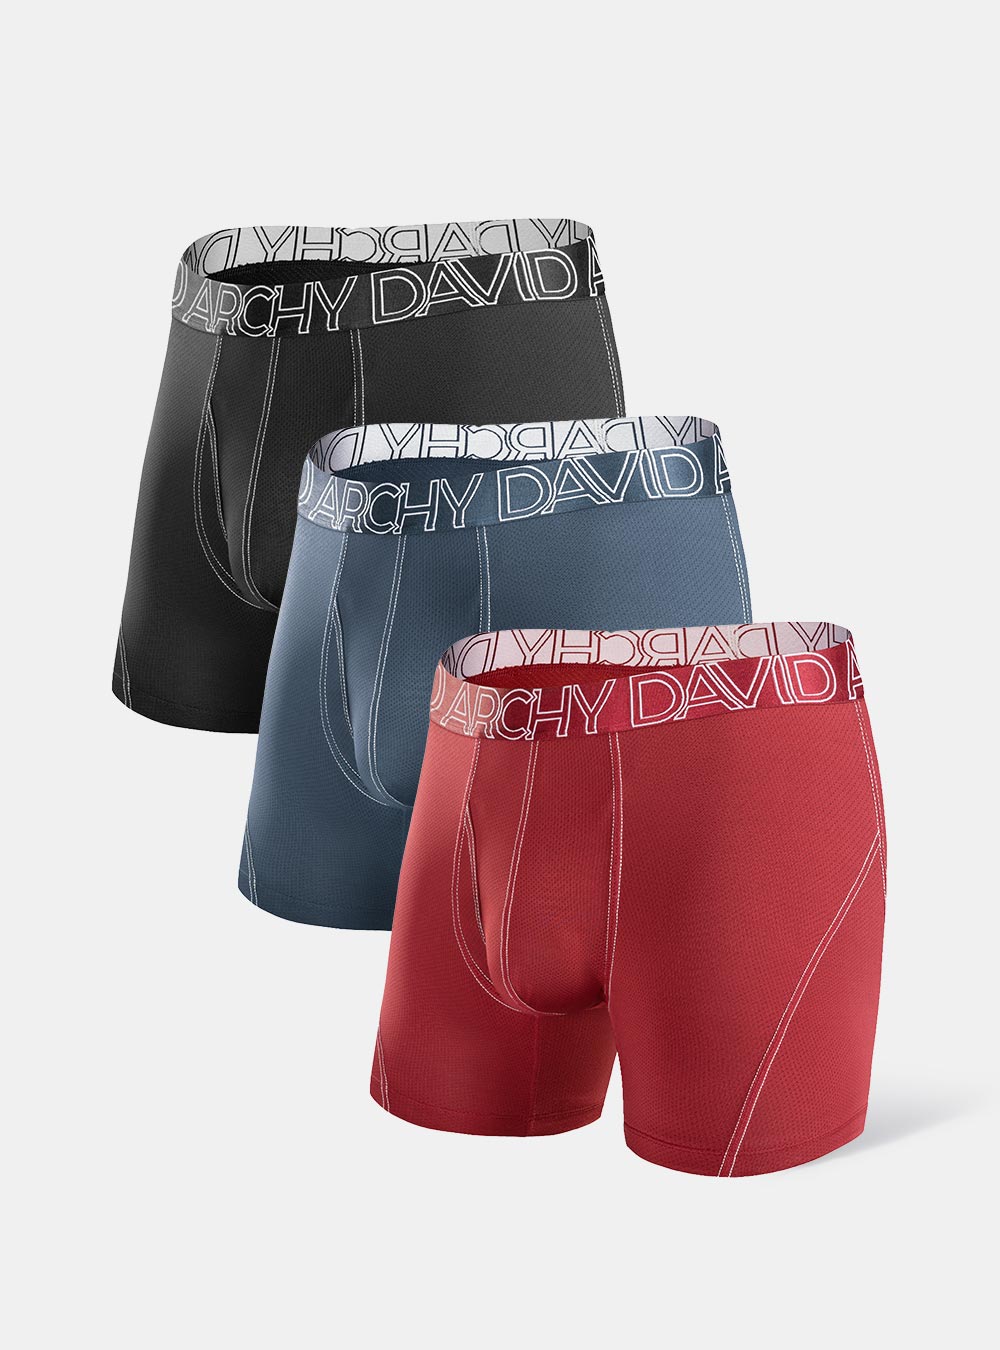 Set of 3 Boxers Modern Structure - grey, black and red grape: Packs